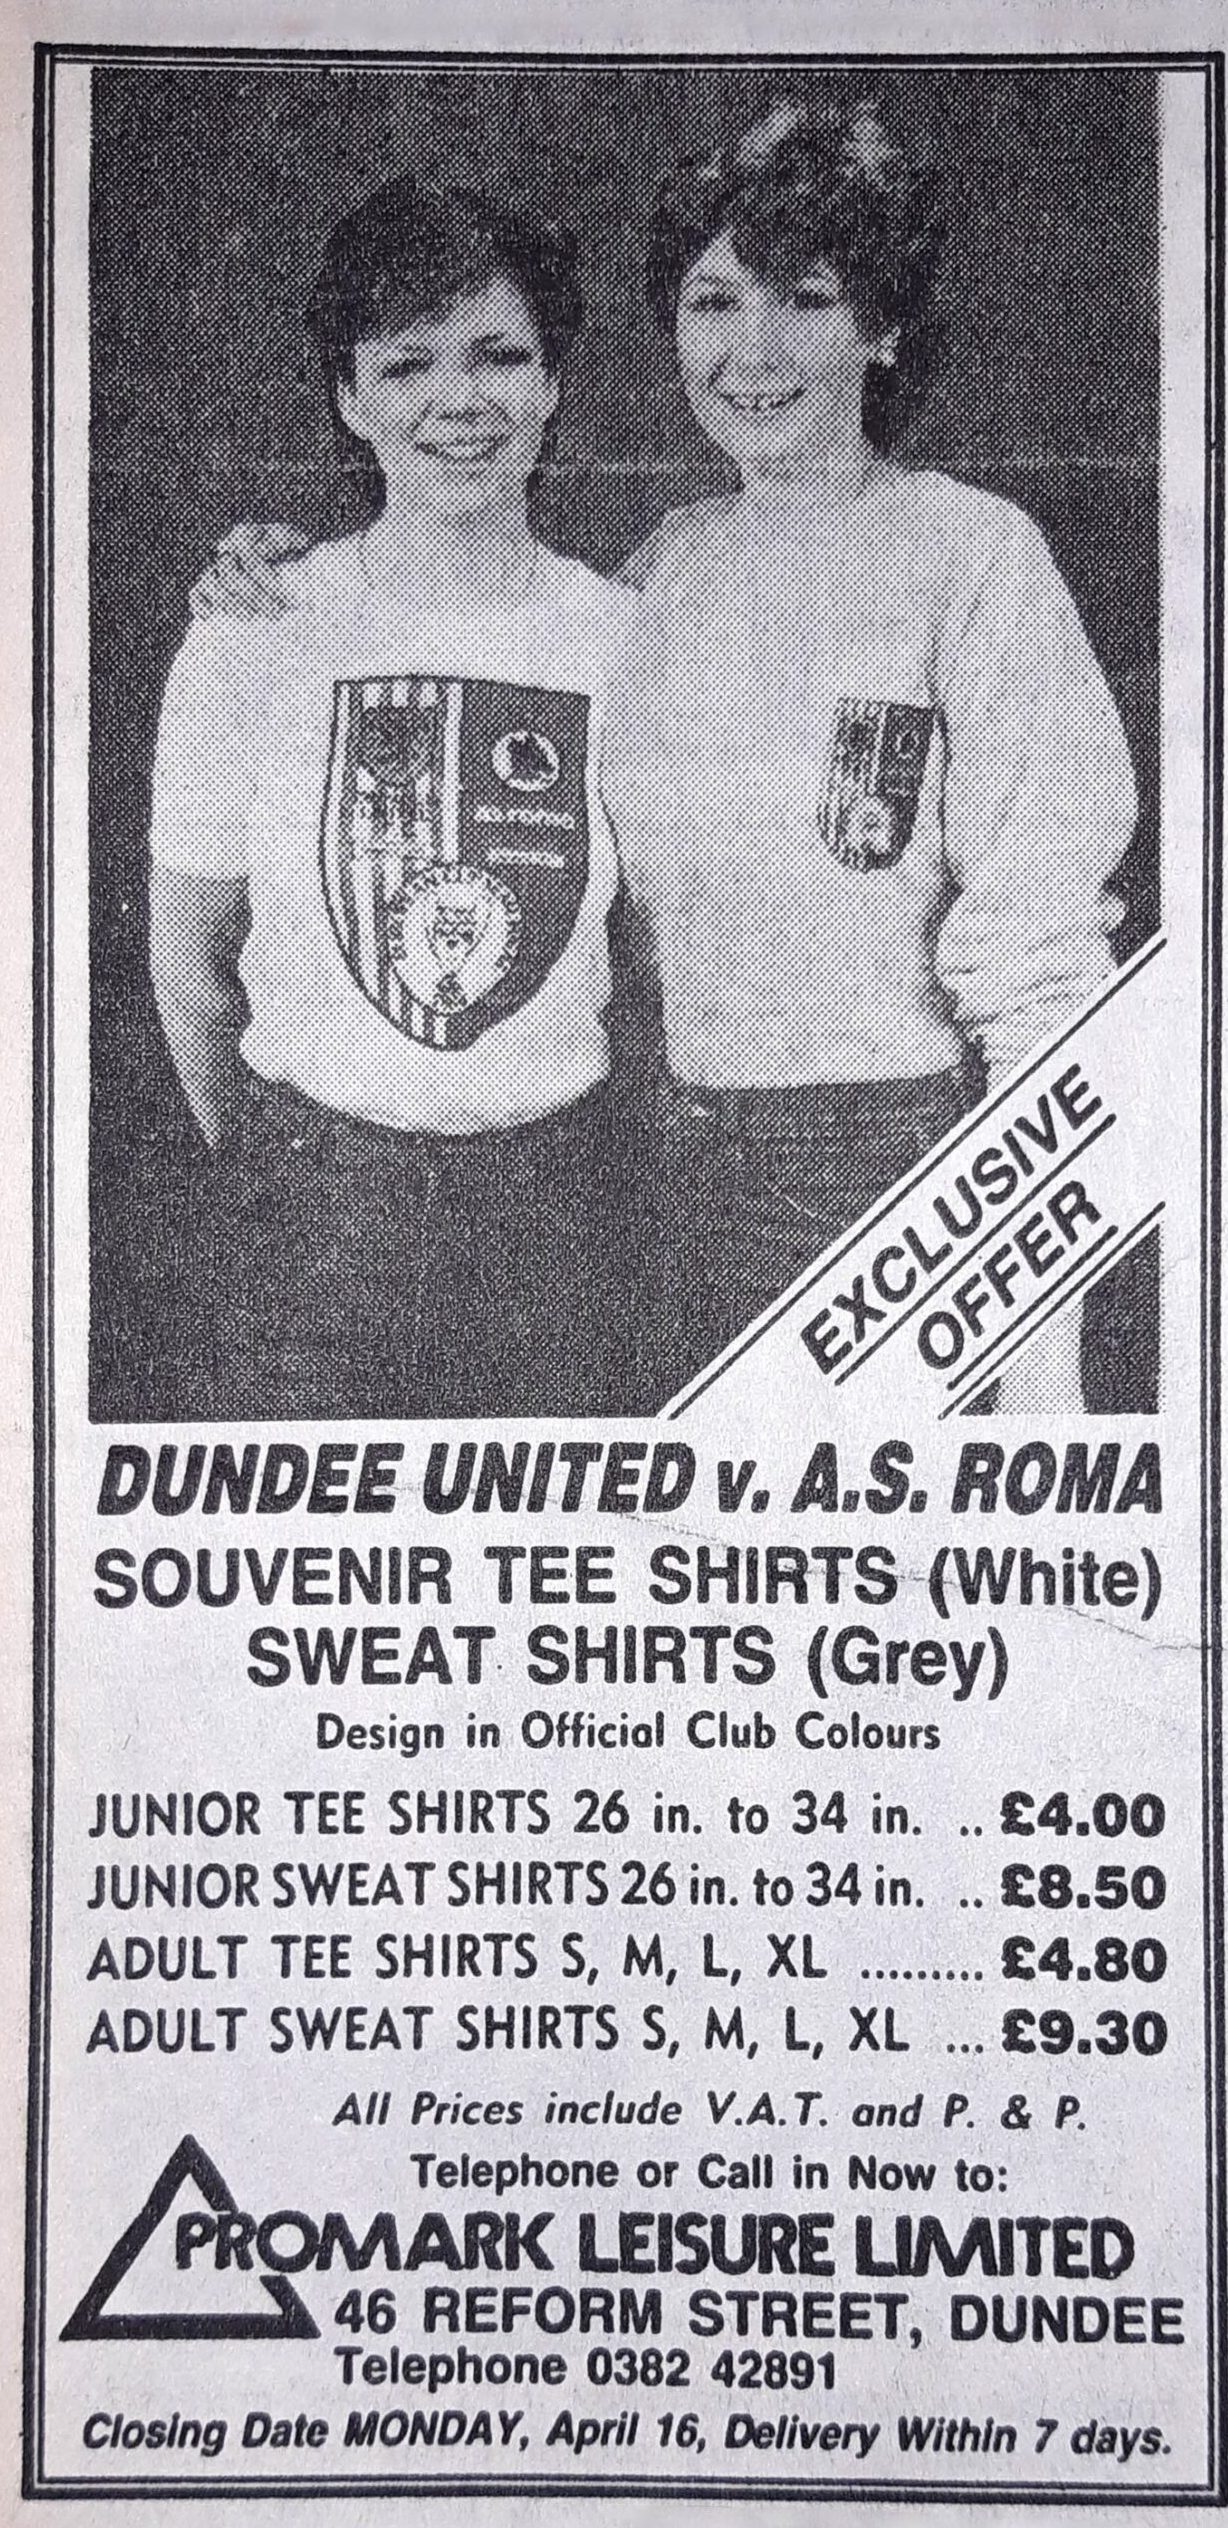 Dundee United versus Roma 1984 t-shirts were advertised, here with two women modelling the clothes